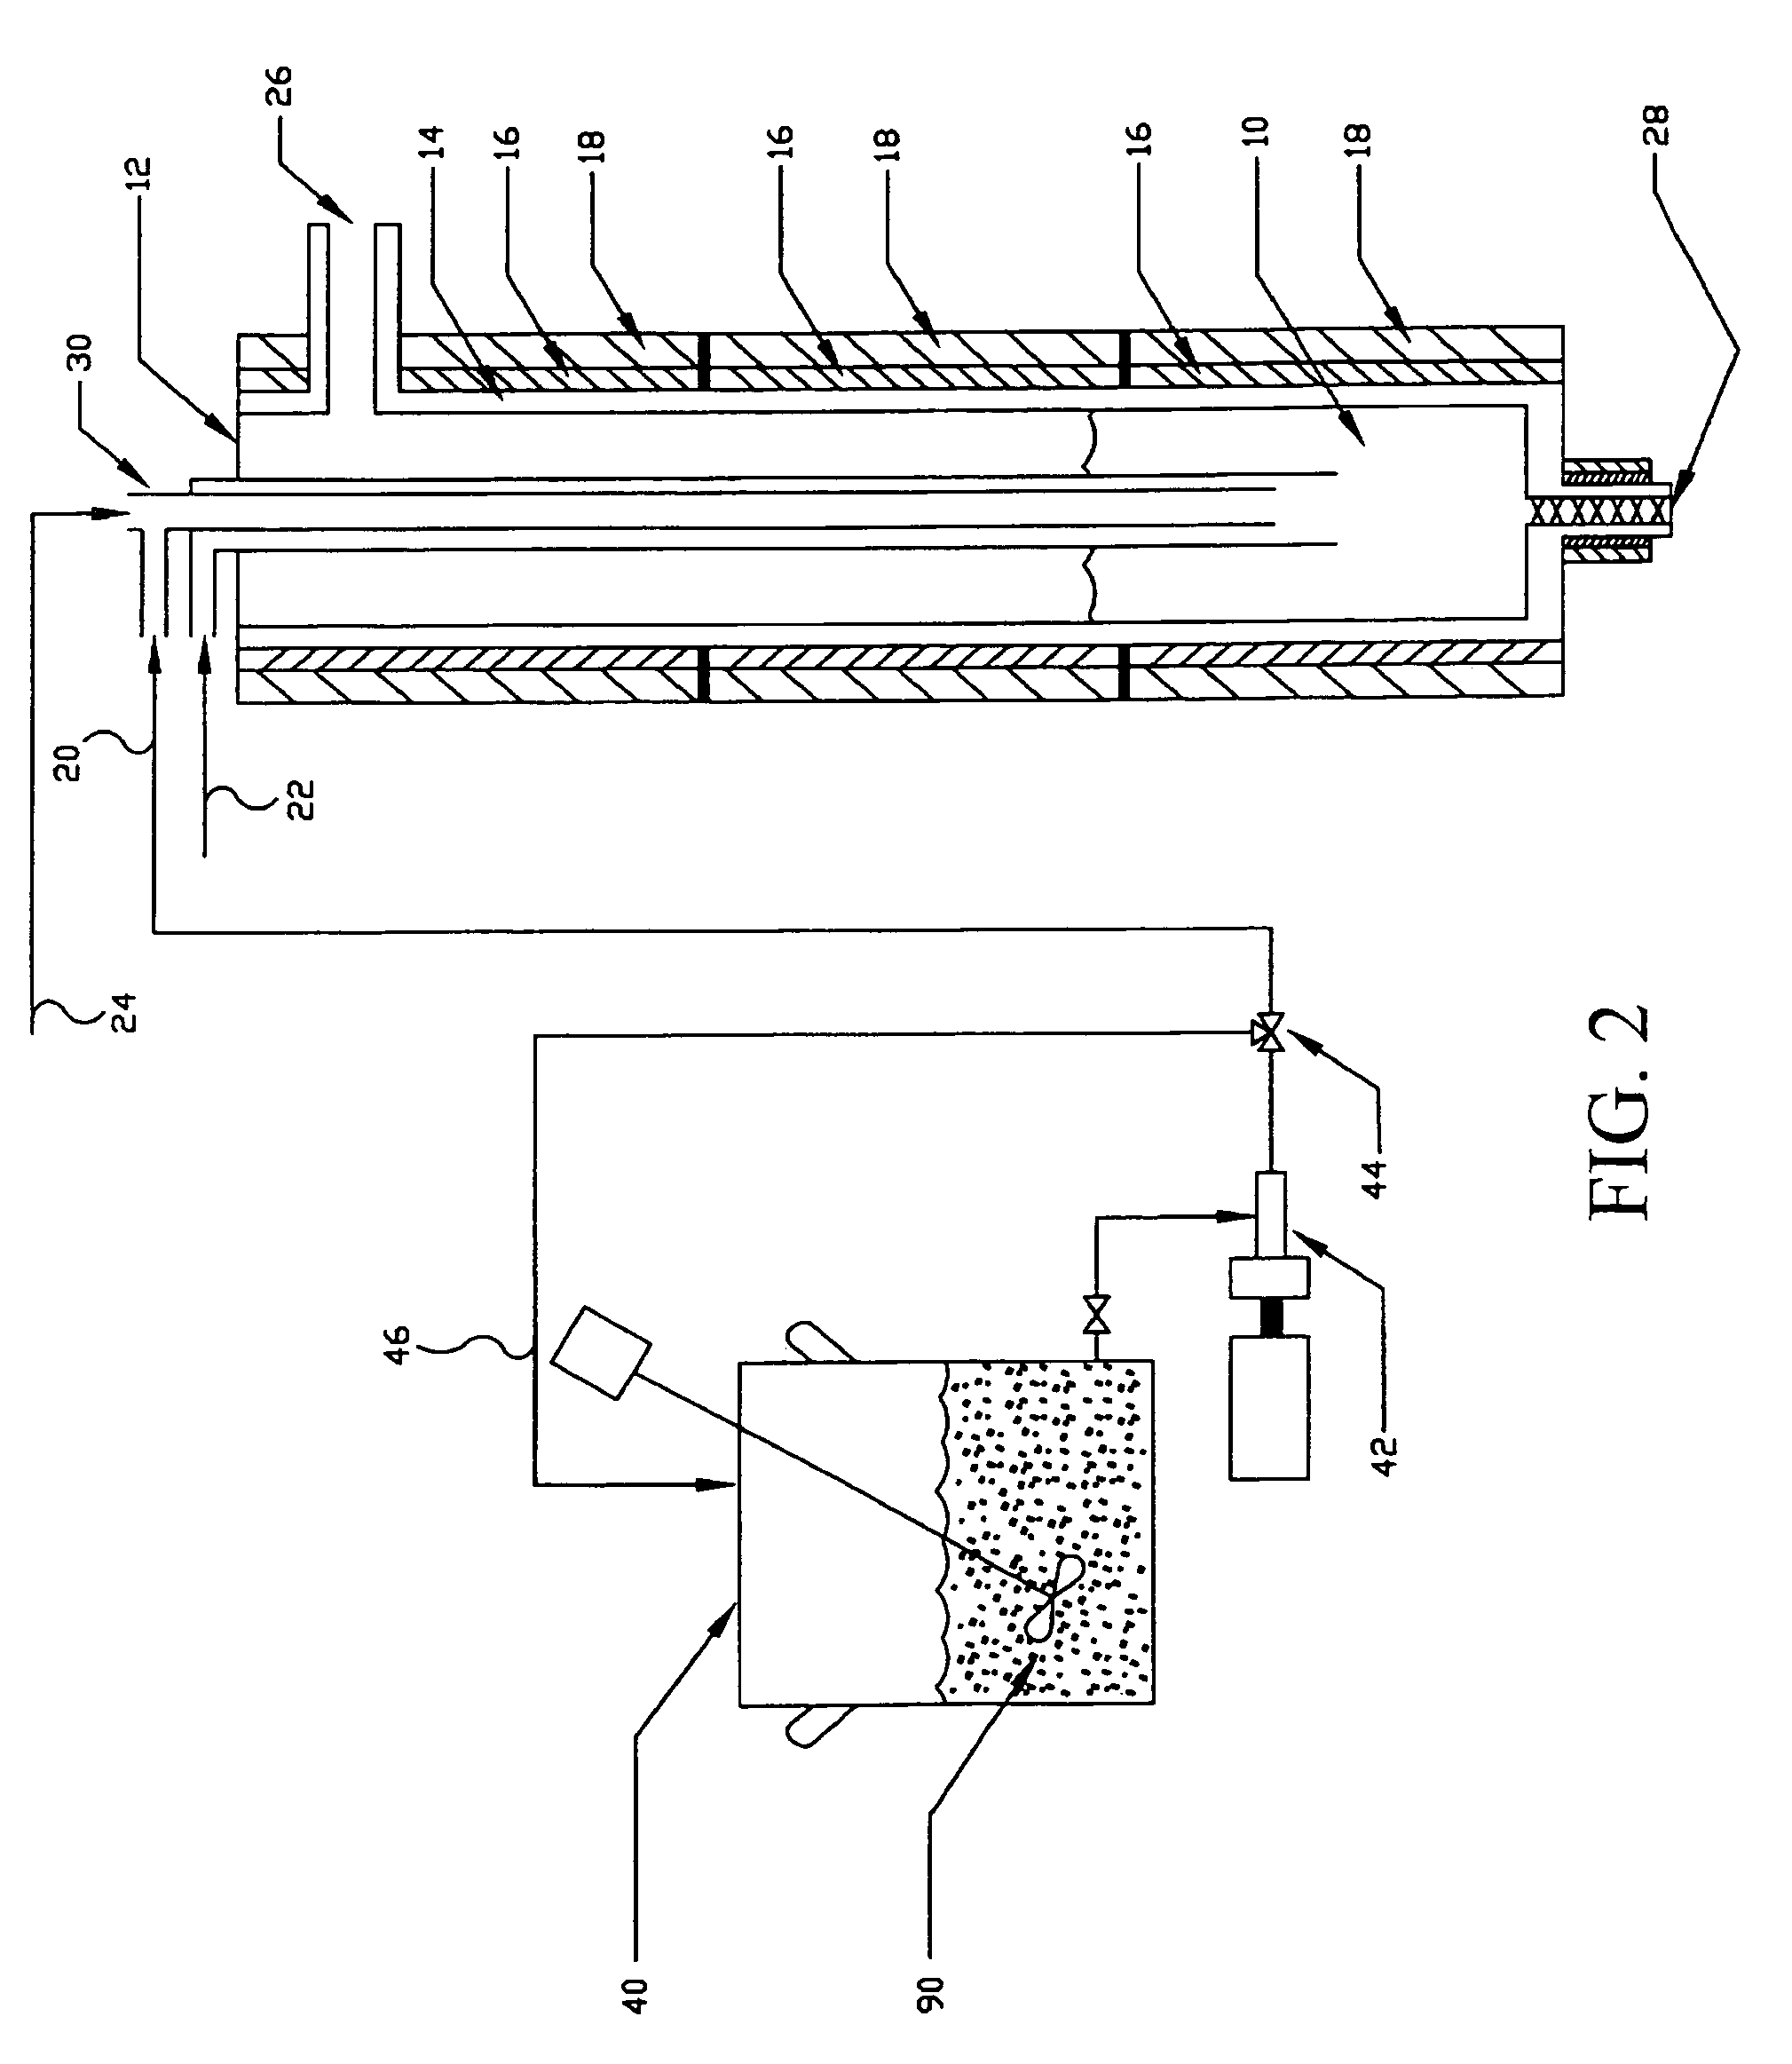 System for treating wastes using molten salt oxidation